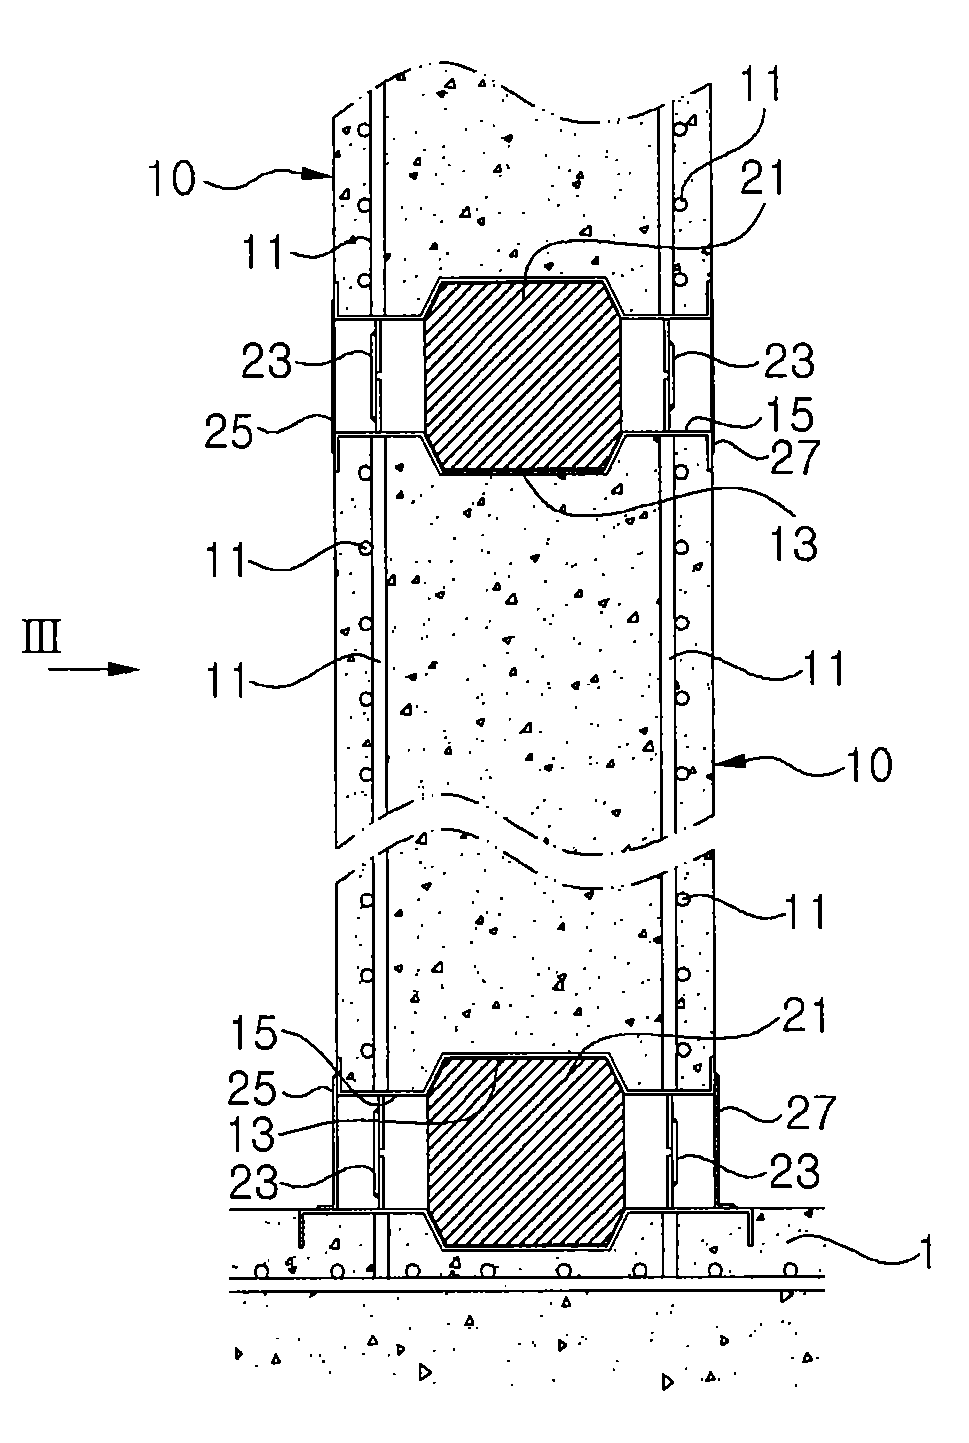 Method of constructing liquefied gas storage tank on land